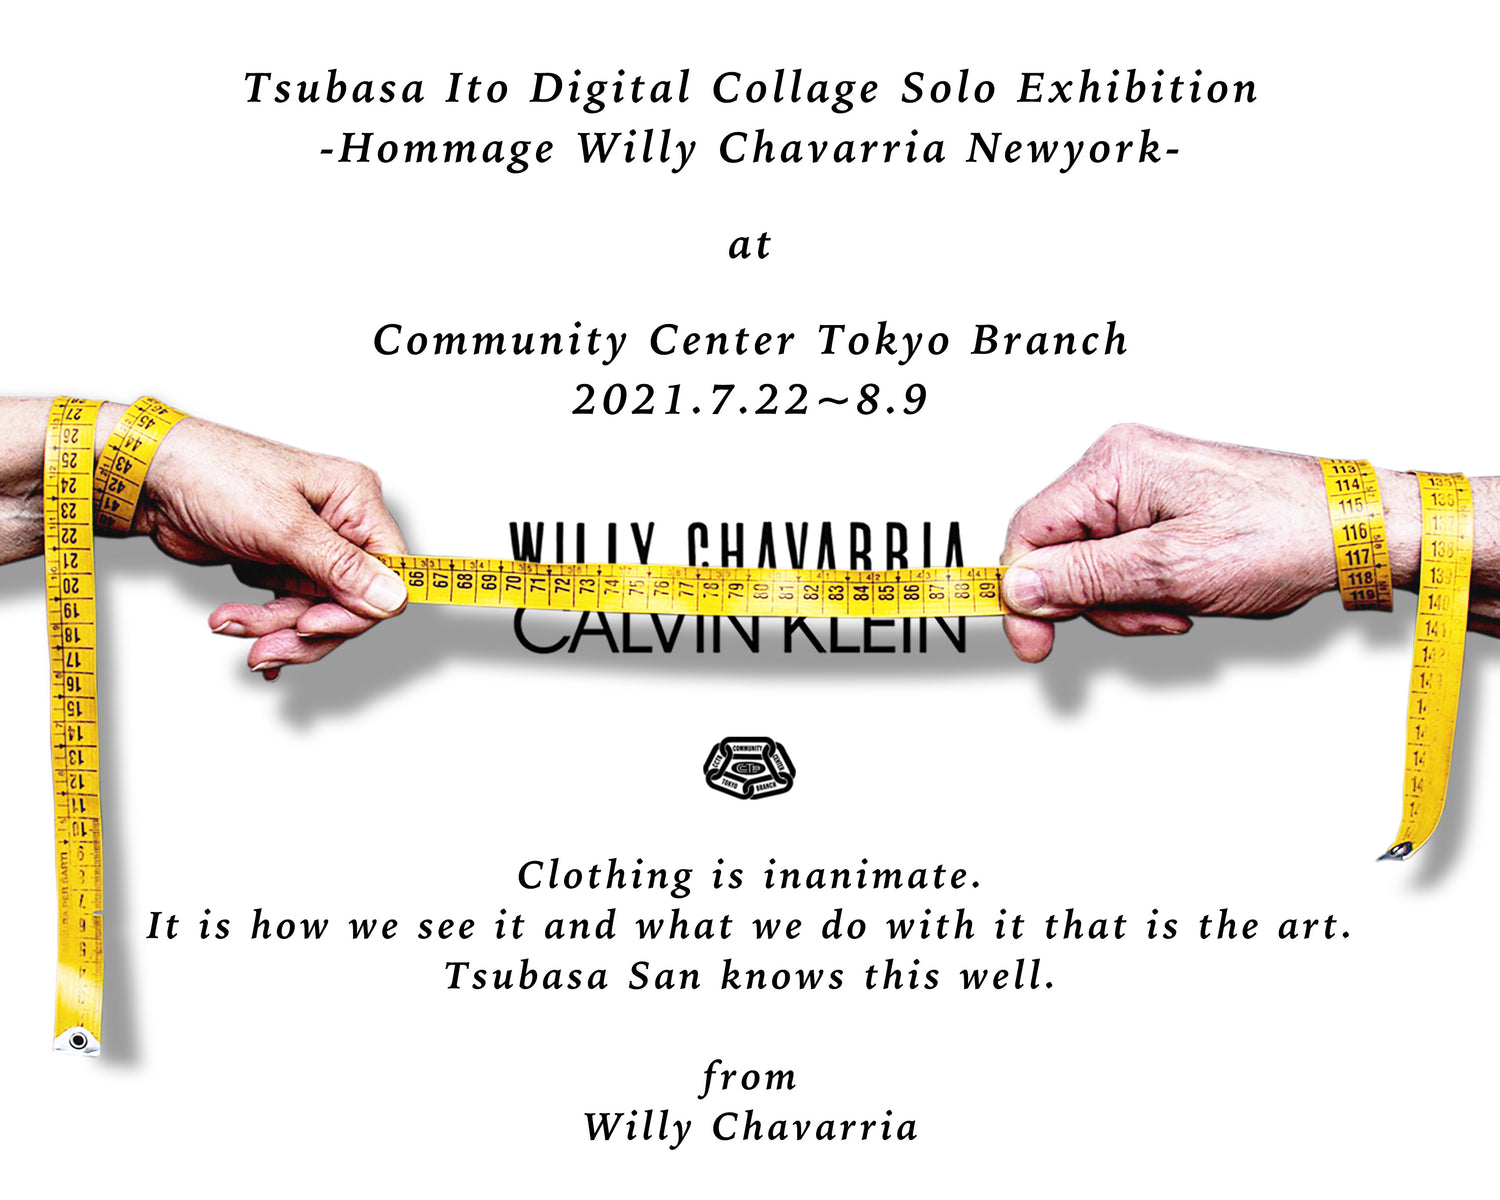 Tsubasa Ito Digital collage solo exhibition Hommage Willy Chavarria Newyork